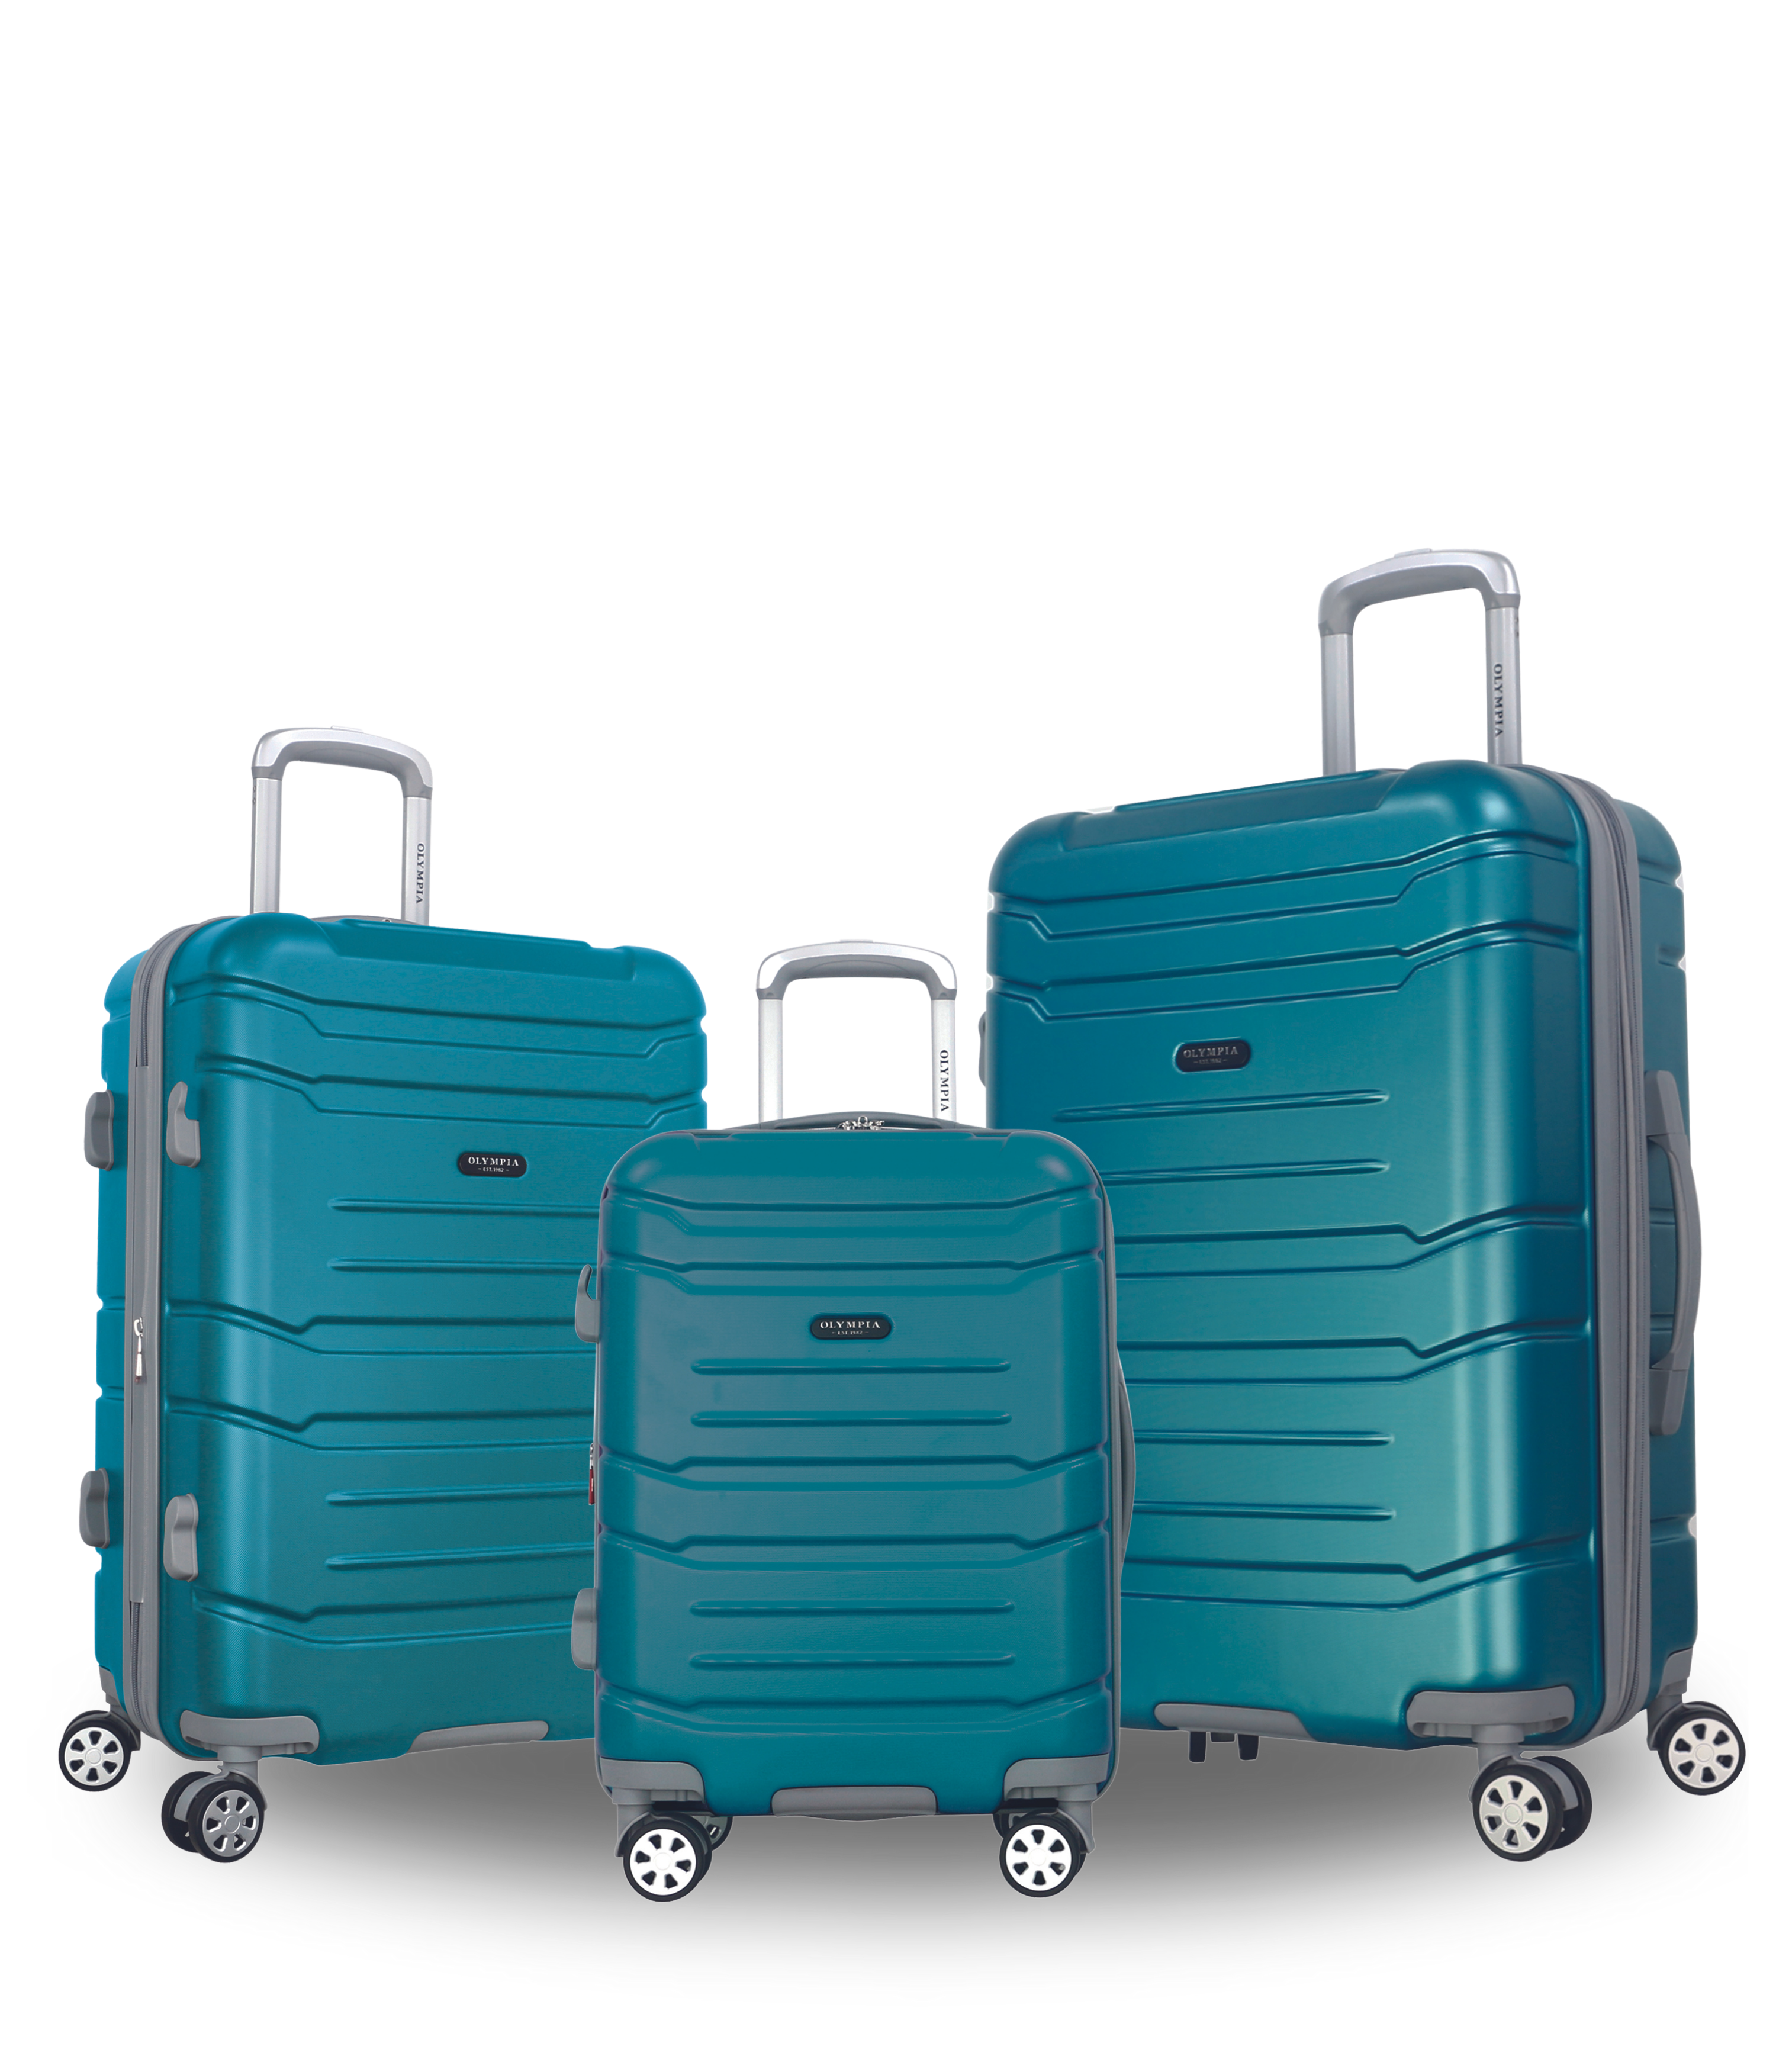 Denmark Plus Bestseller: Sturdy and Lightweight 3-PIECE SETS with Patented Guaranteed Organizational Features